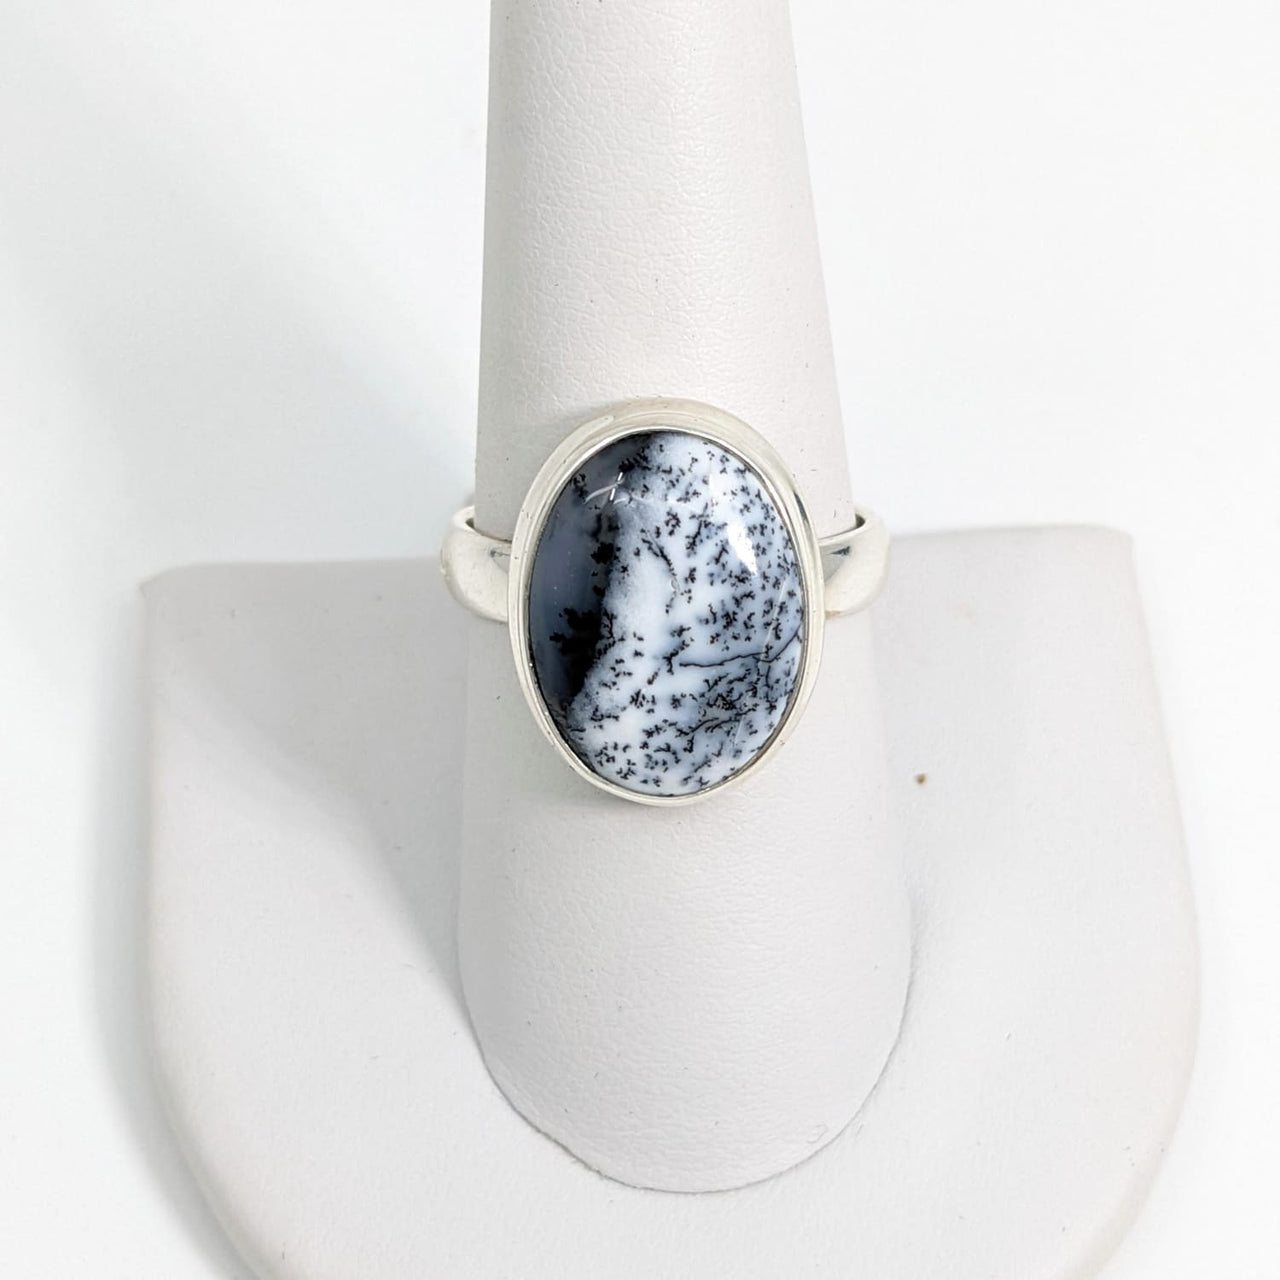 Dendrite Agate Oval Ring Sz 9 #SK8551 - $89